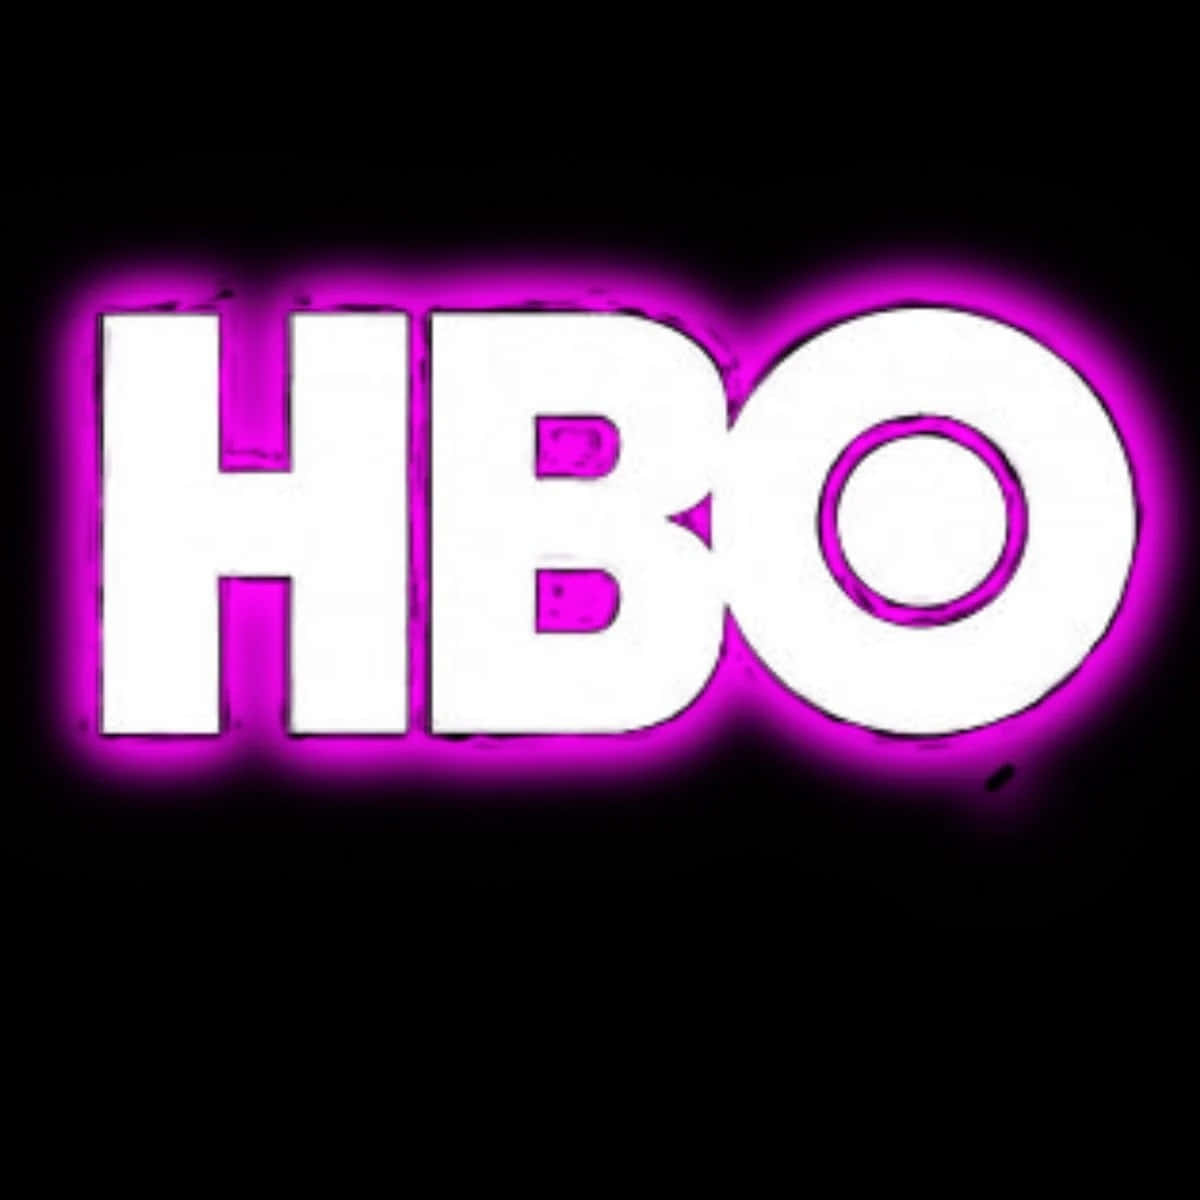 Get your next favourite show with HBO